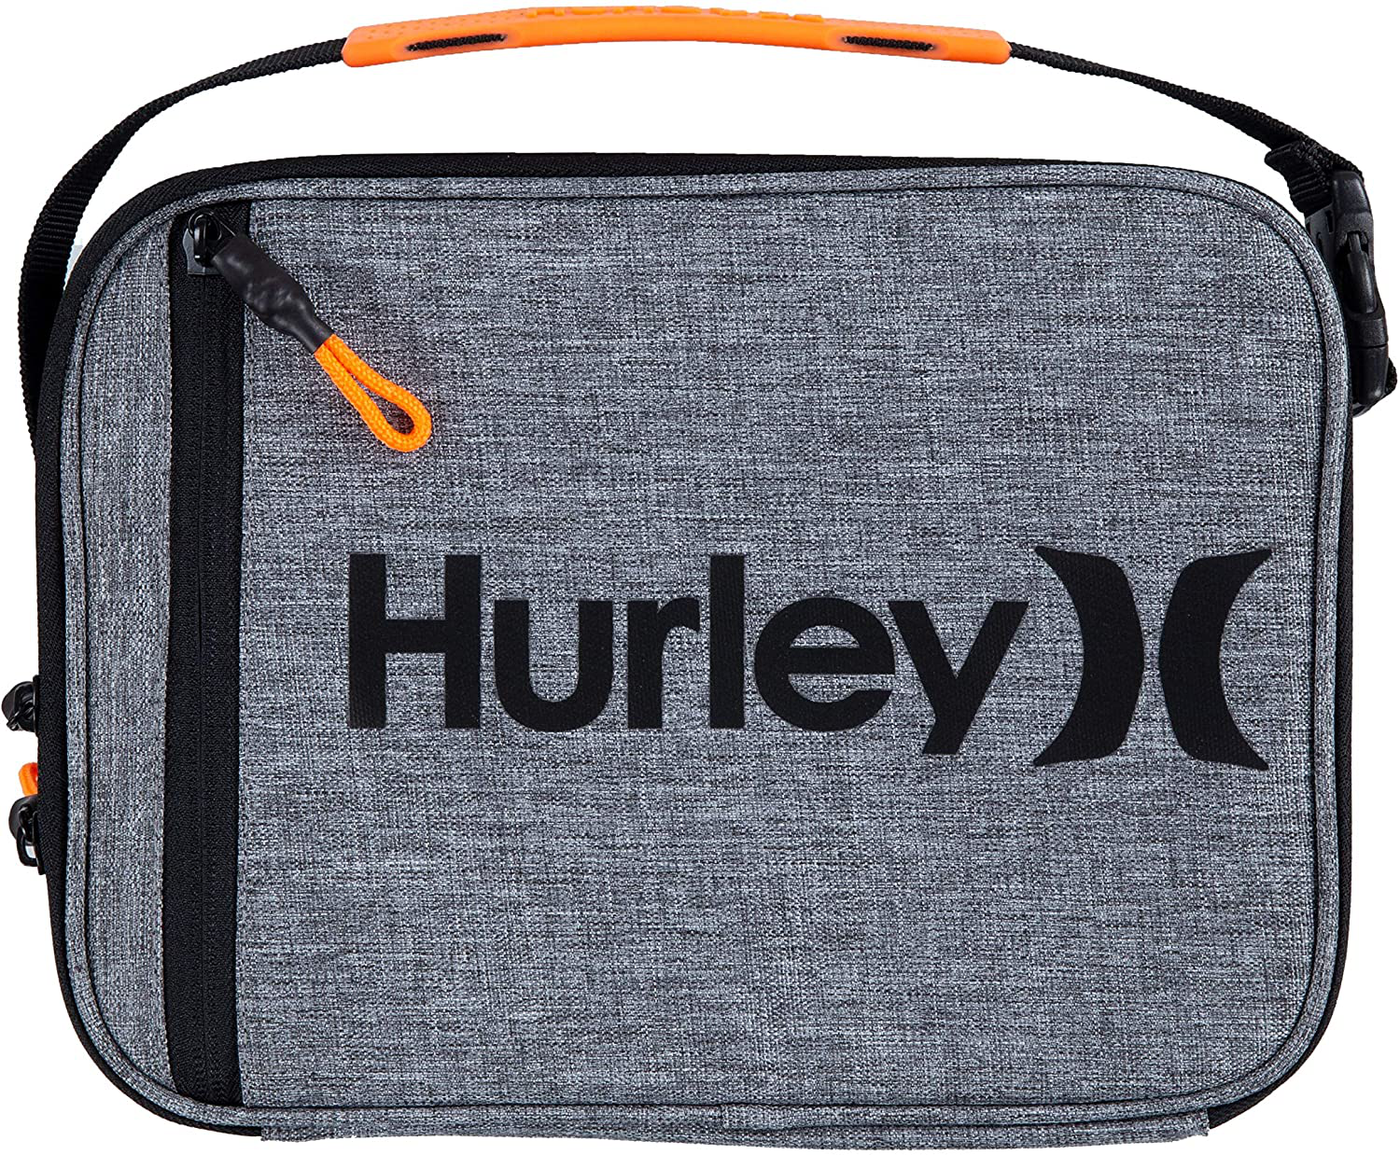 Hurley Kids' One and Only Insulated Lunch Box, Green Camo, O/S